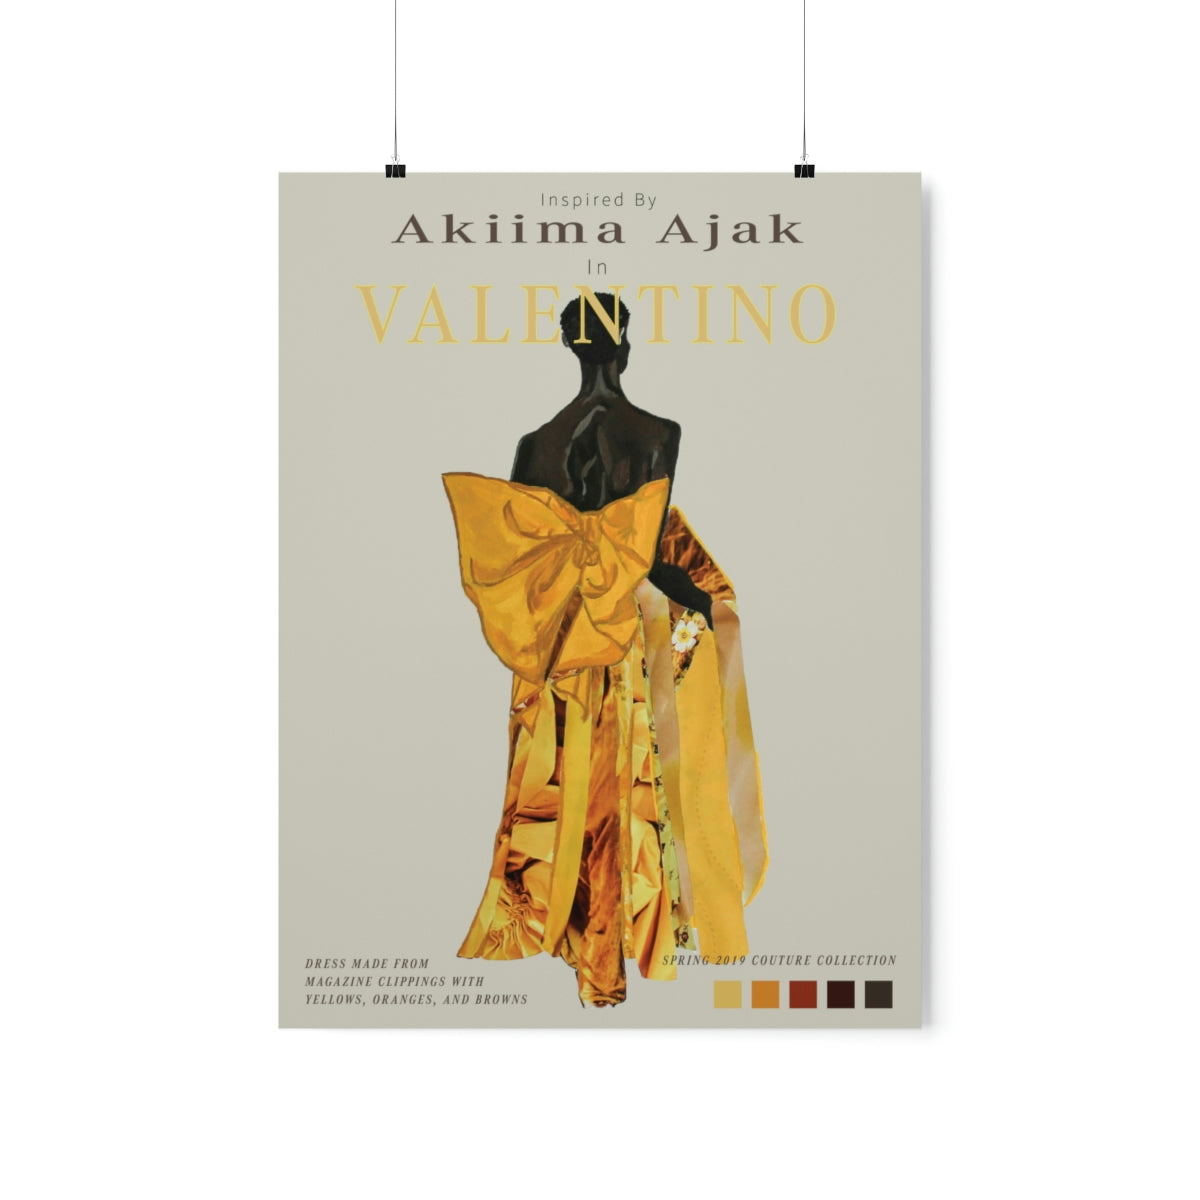 Archival Posters: The Akiima Ajak Valentino Collage Dress Matte Fashion Poster - Cut-Out Version